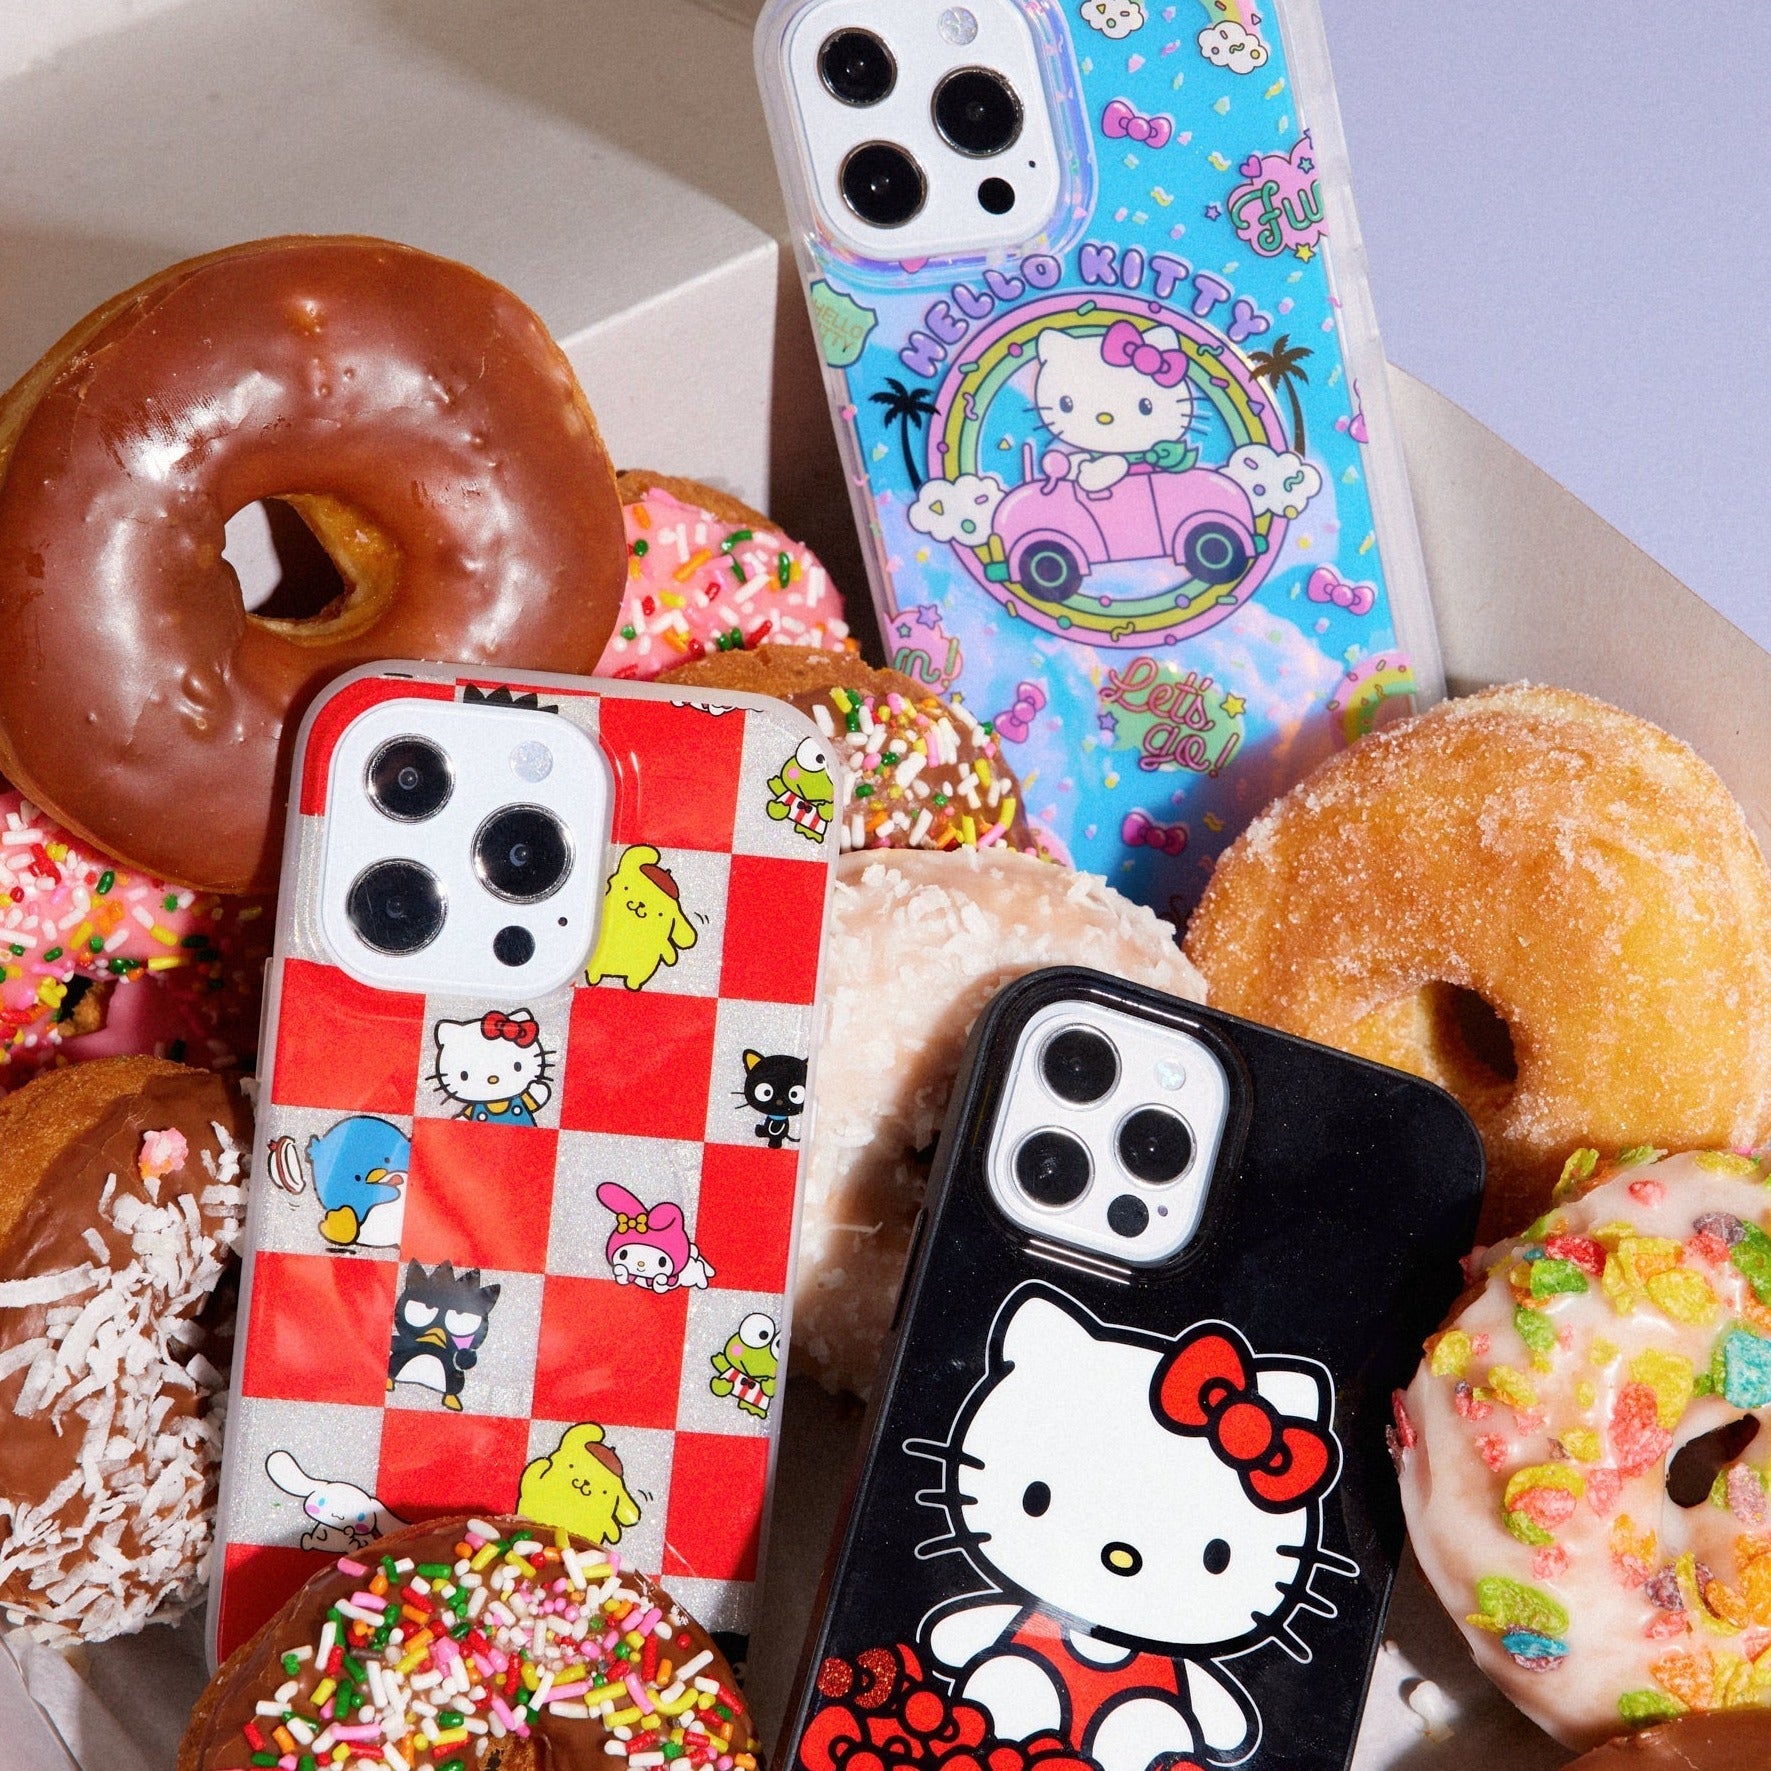 three hello kitty themed phone cases shown in a box of donuts